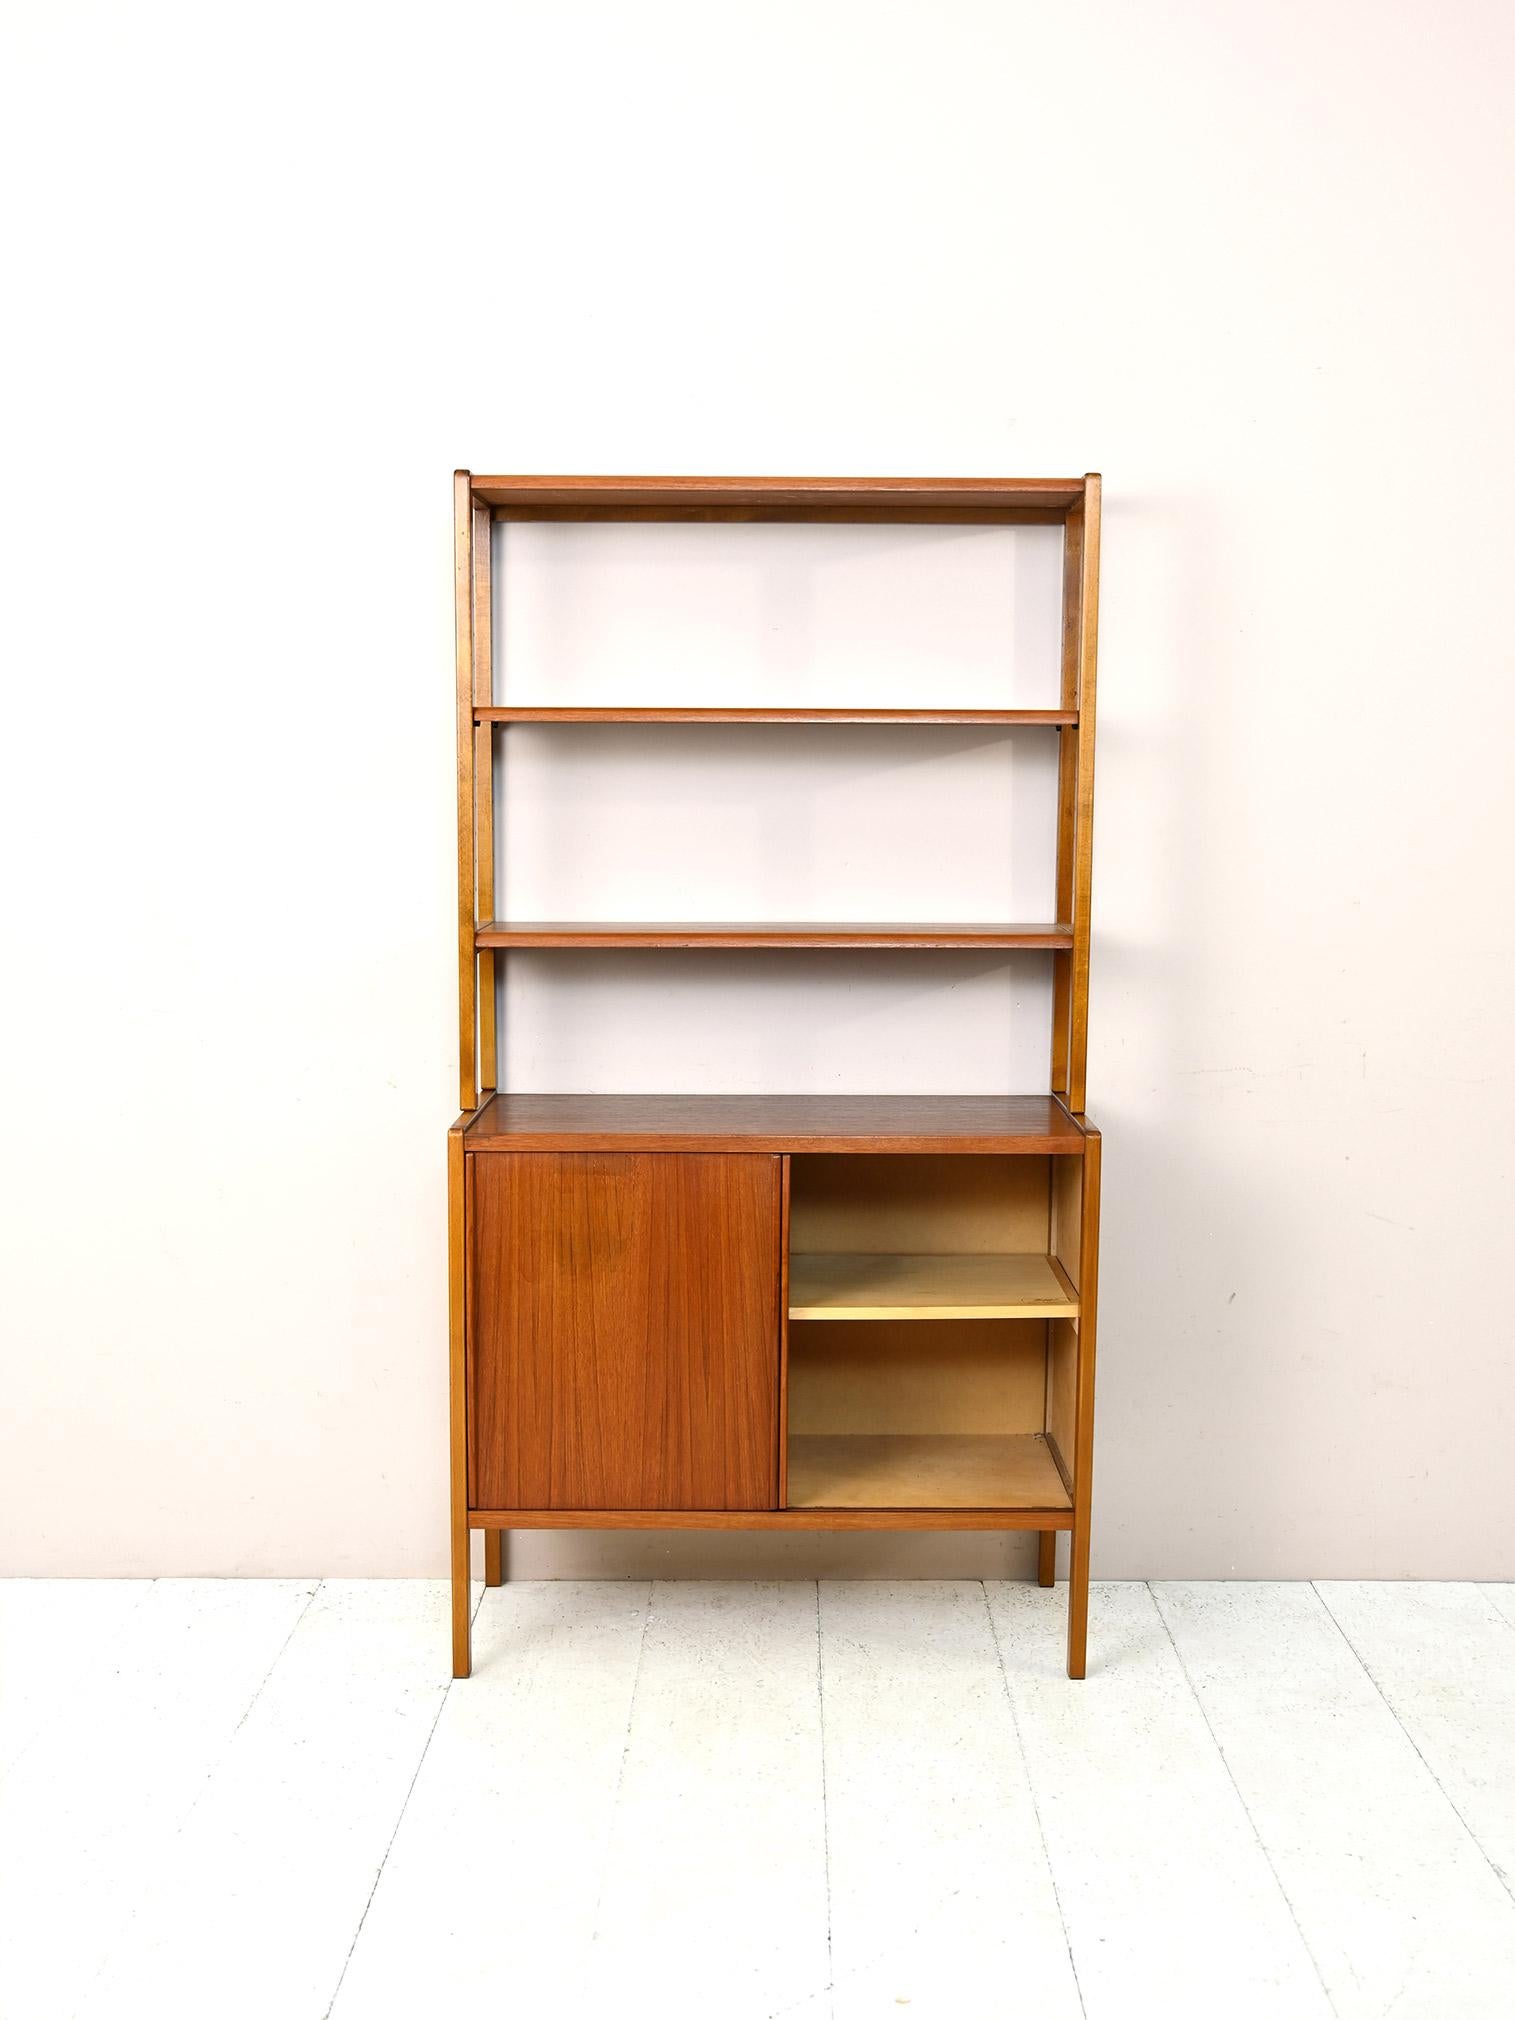 Scandinavian 1960s shelving cabinet.

This bookcase consists of two modules: the lower part is a storage unit with sliding doors, the upper part is an adjustable-height shelving system.
Simple appearance and a focus on functionality are the